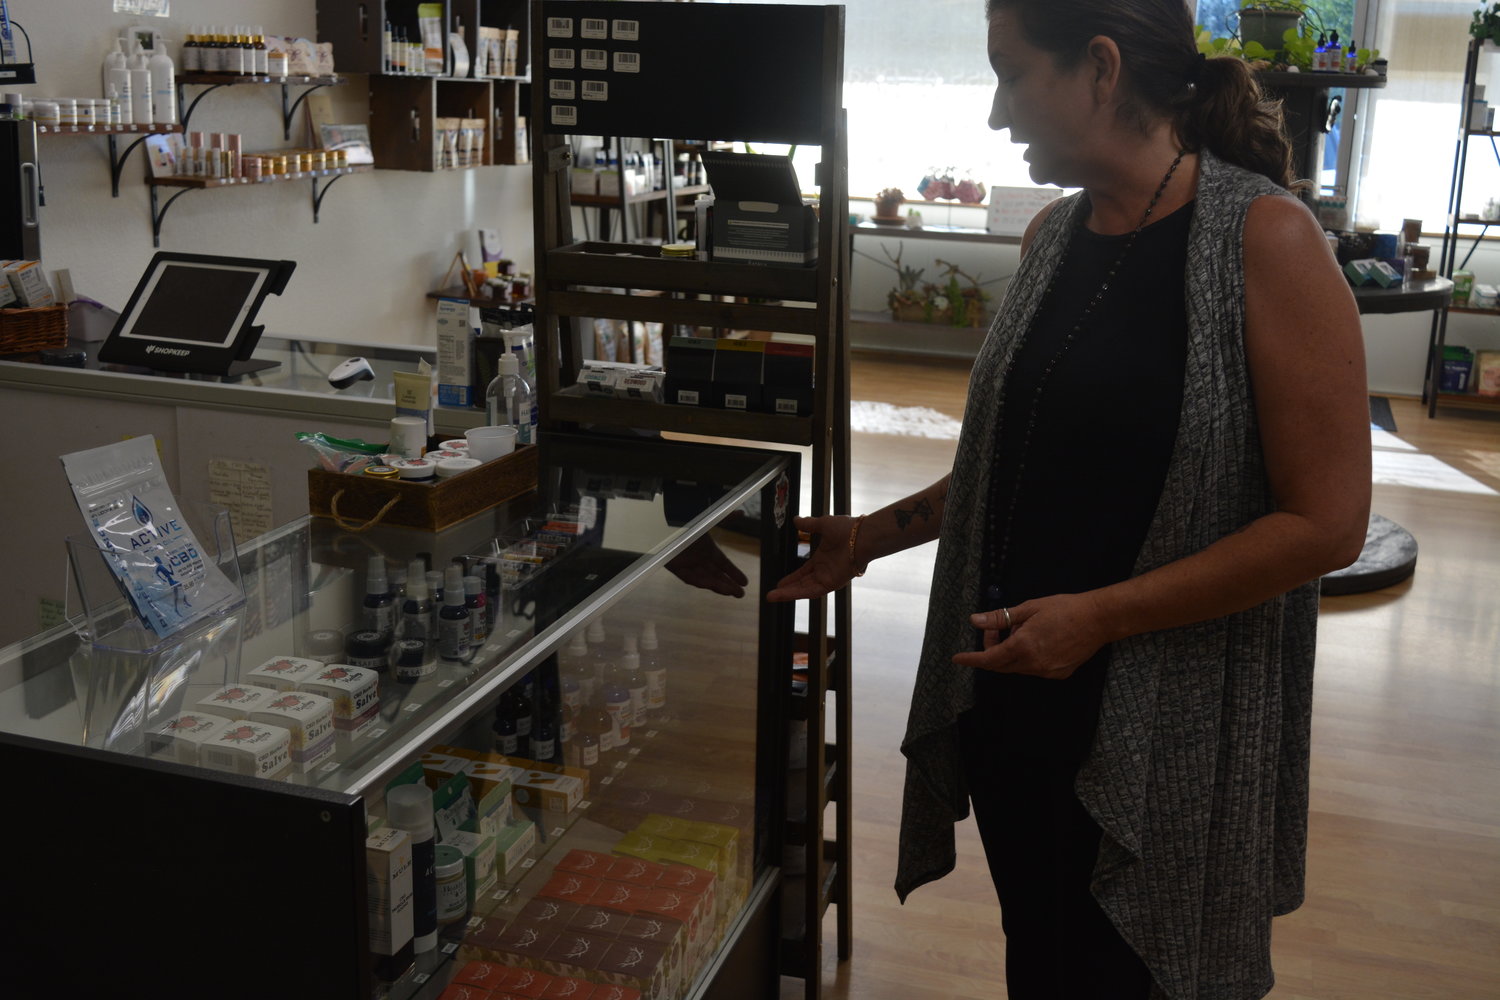 Christina Townsend shows off a case of tinctures and other CBD products at Battle Ground Natural Healing on Aug. 16.